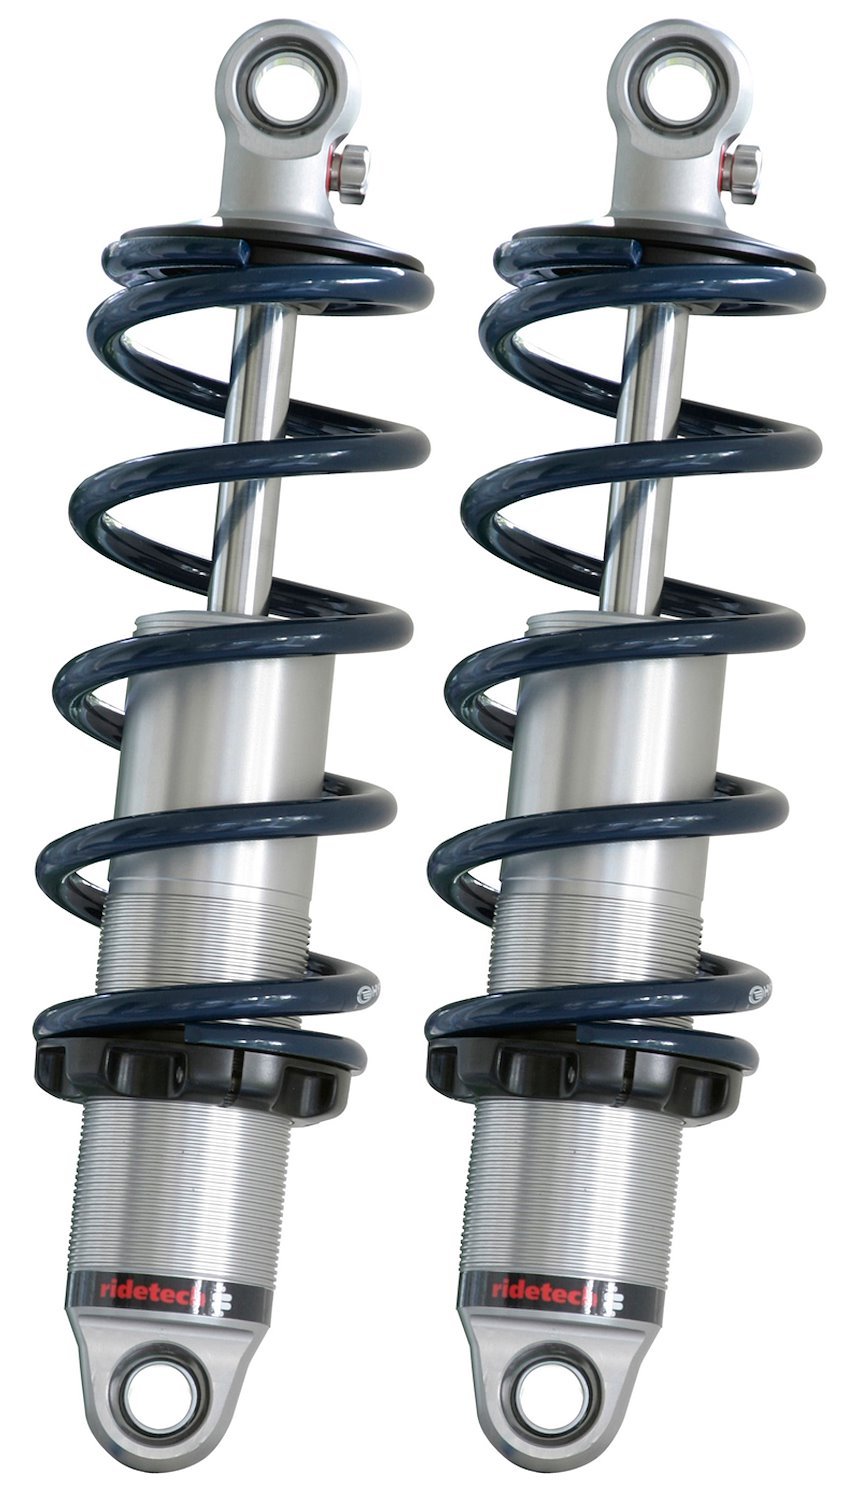 HQ Series rear CoilOver KIT for 10-12 Camaro.